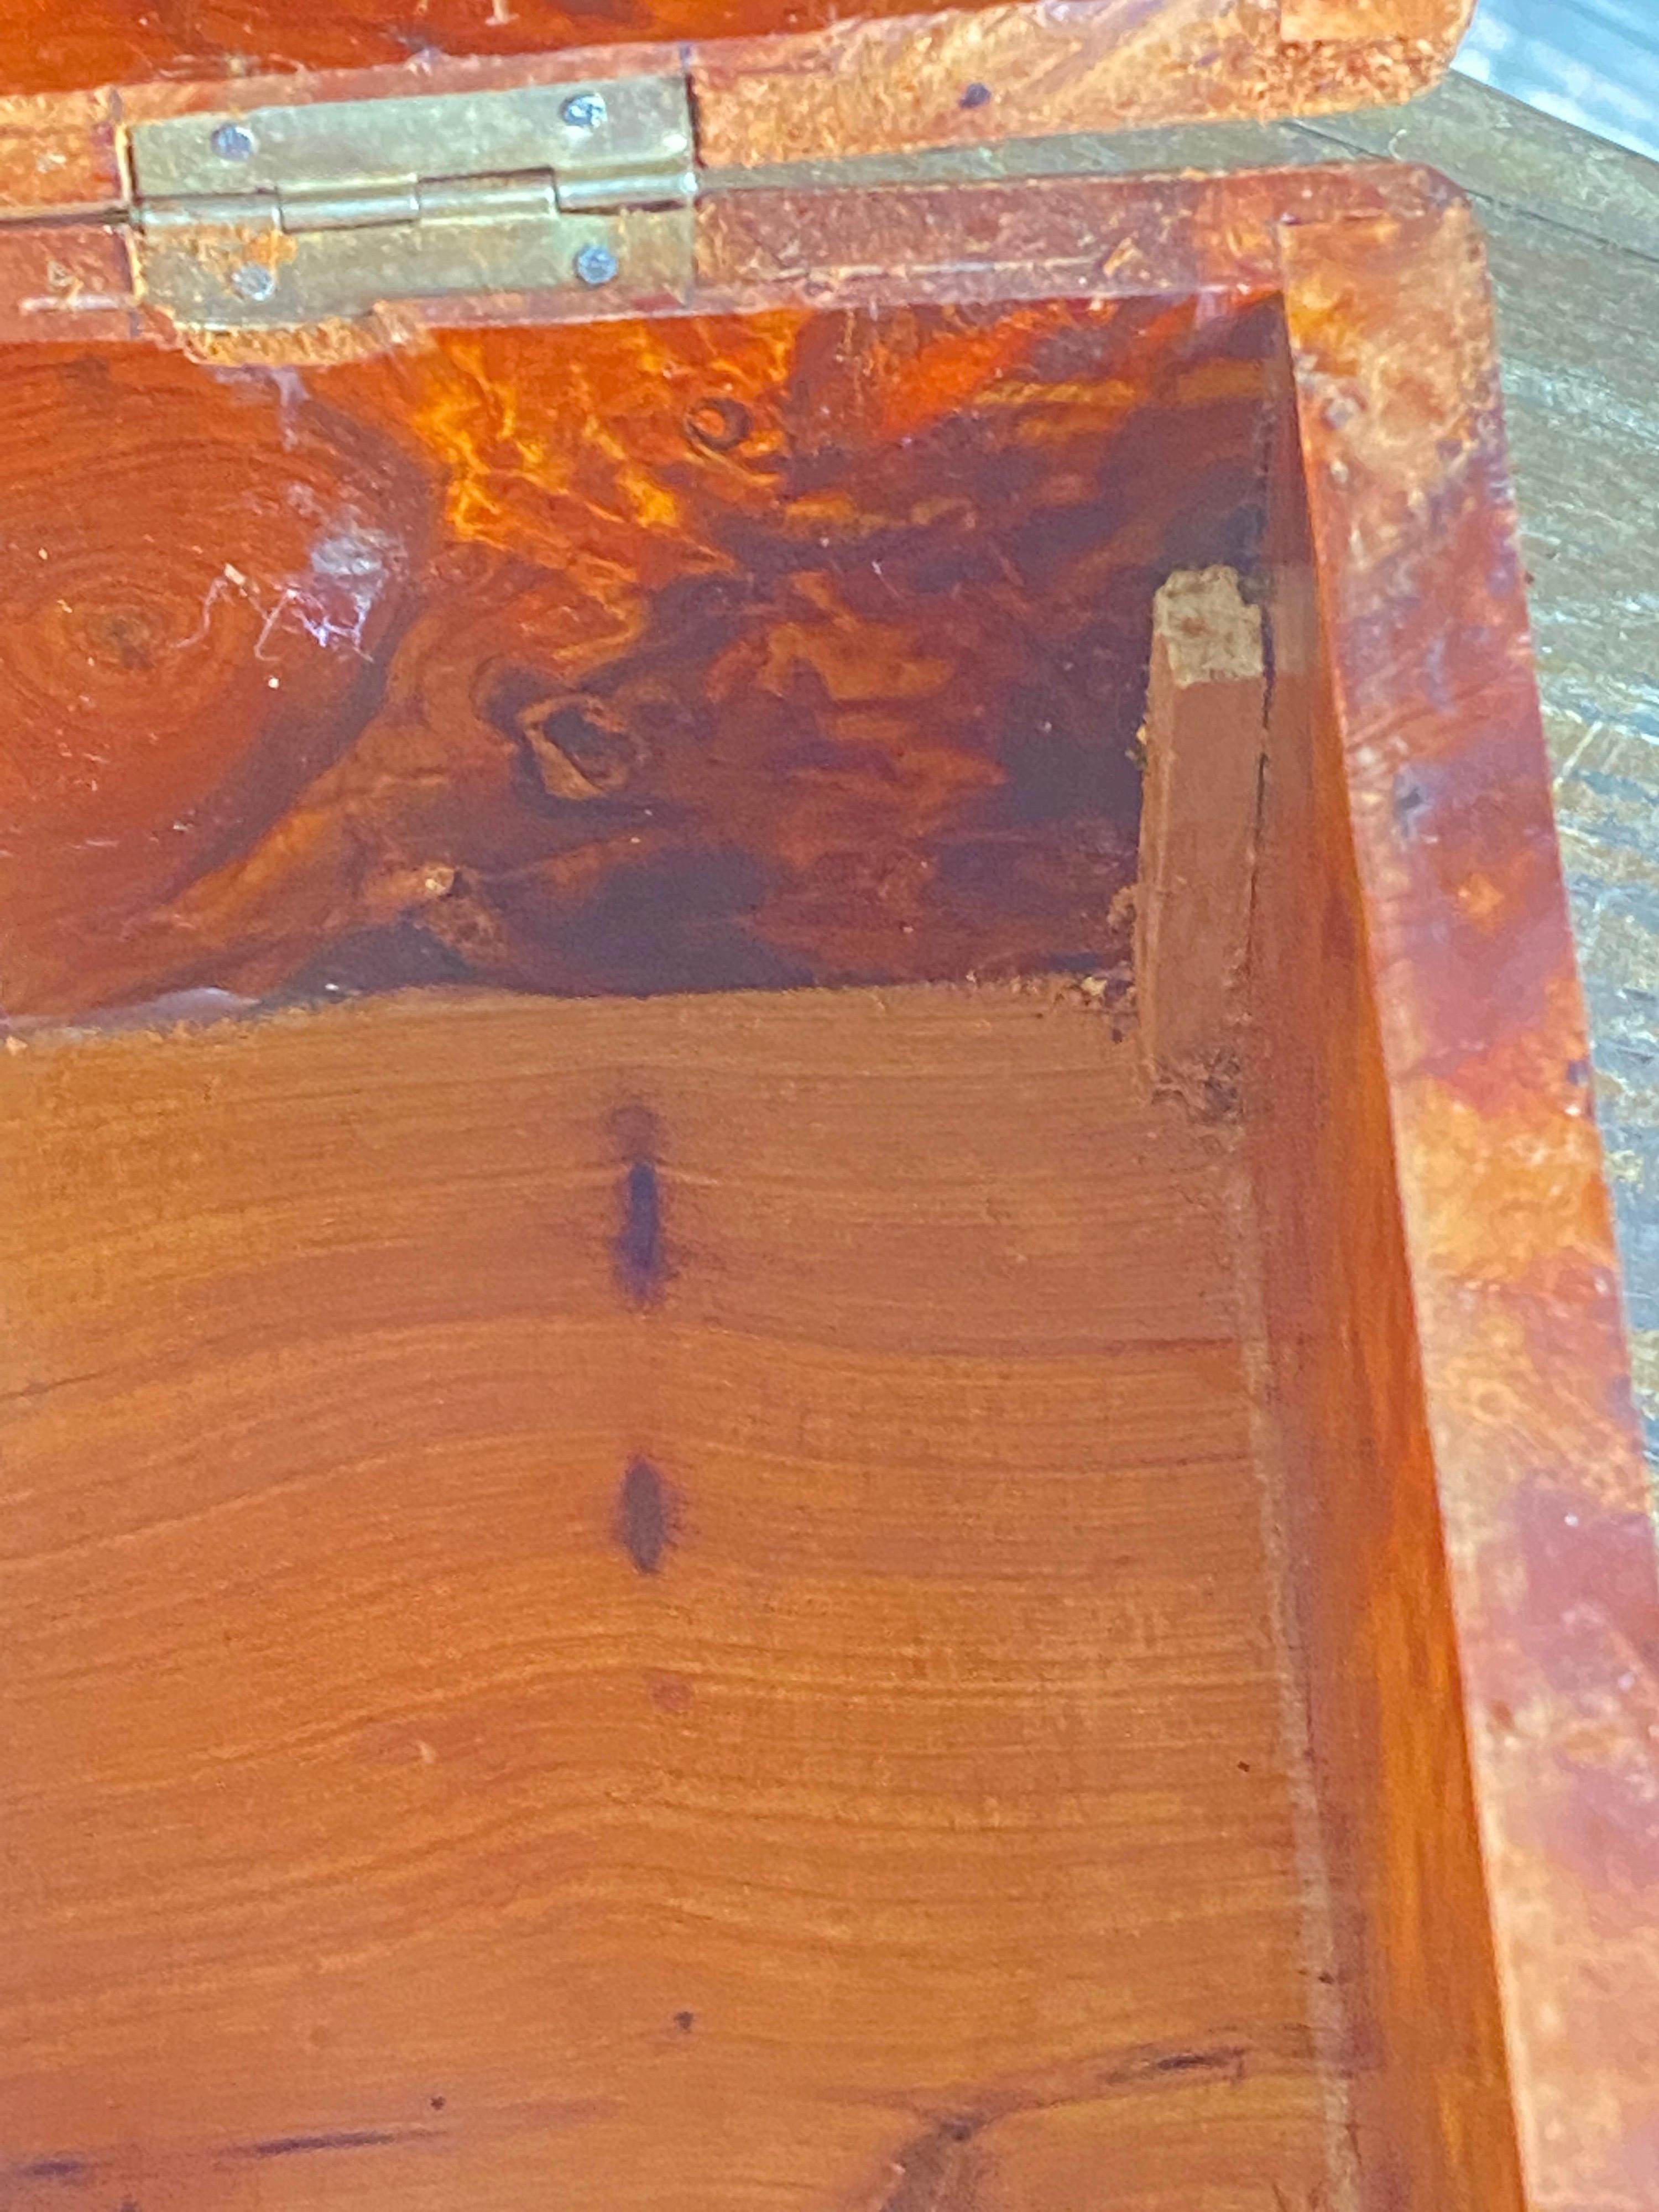 Cigar Box, in Burl Wood, England 1970, Brown Color, with a Second Box Inside 12